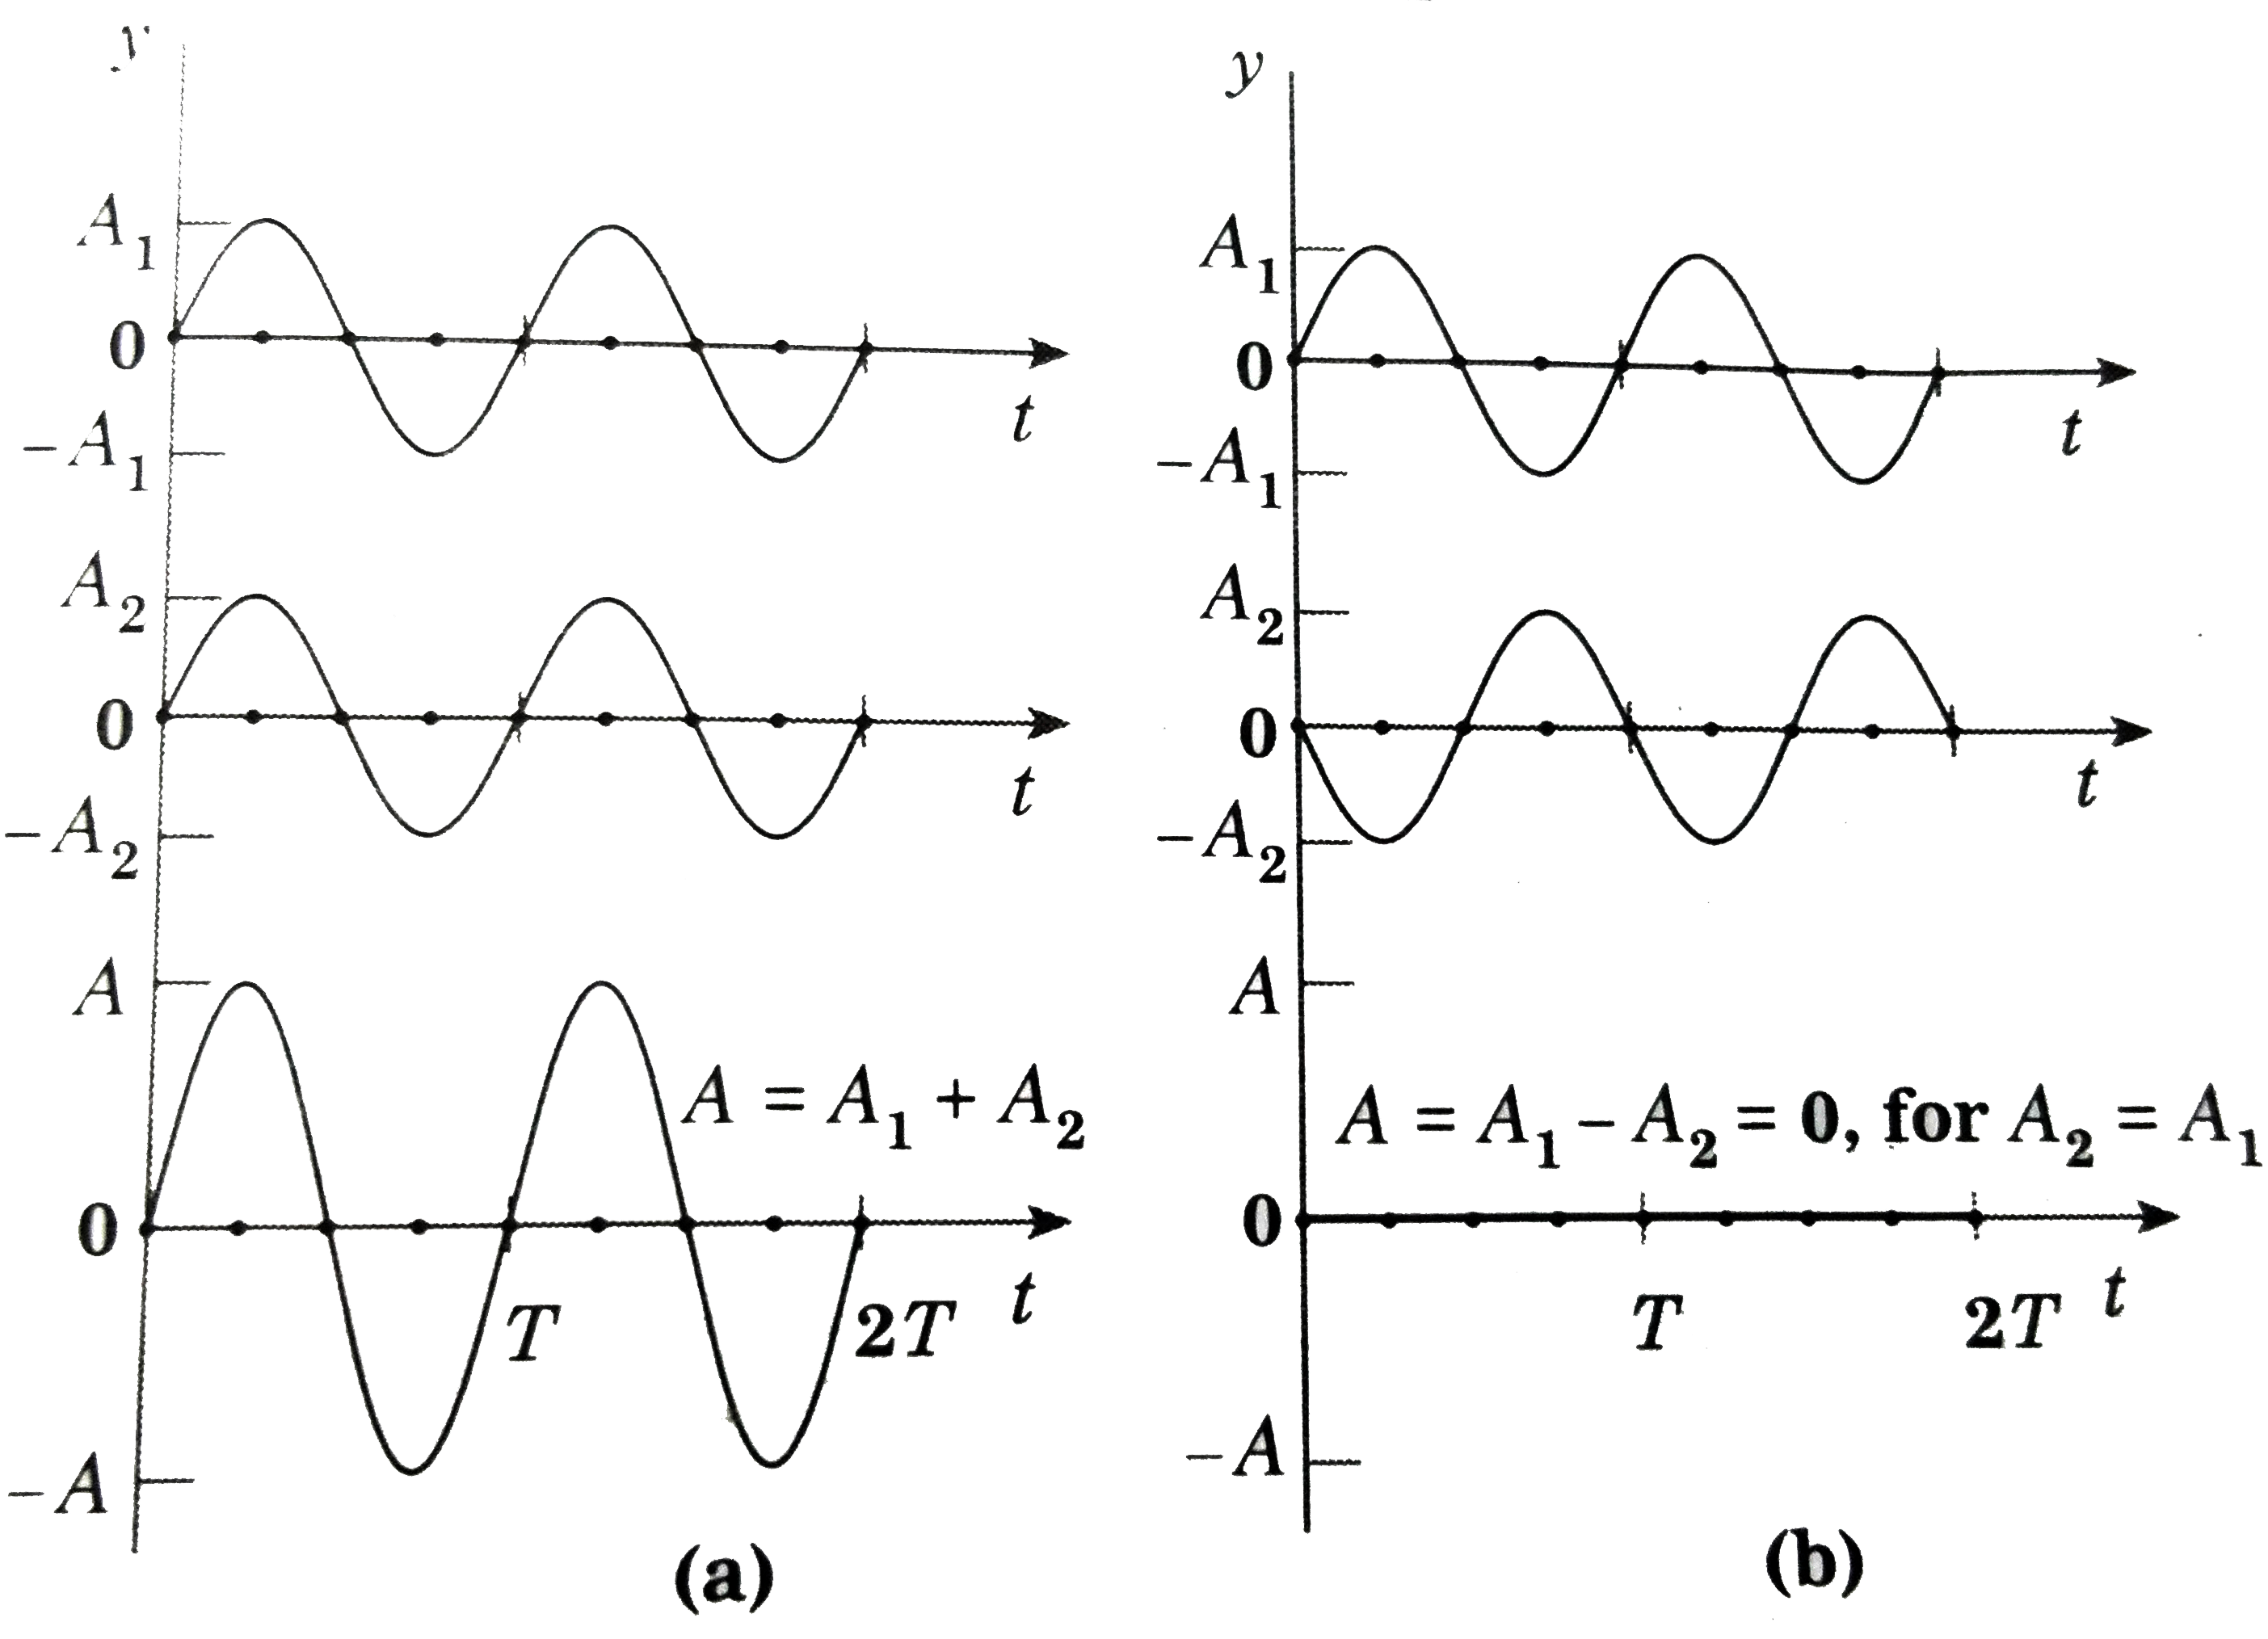 principle of superposition waves